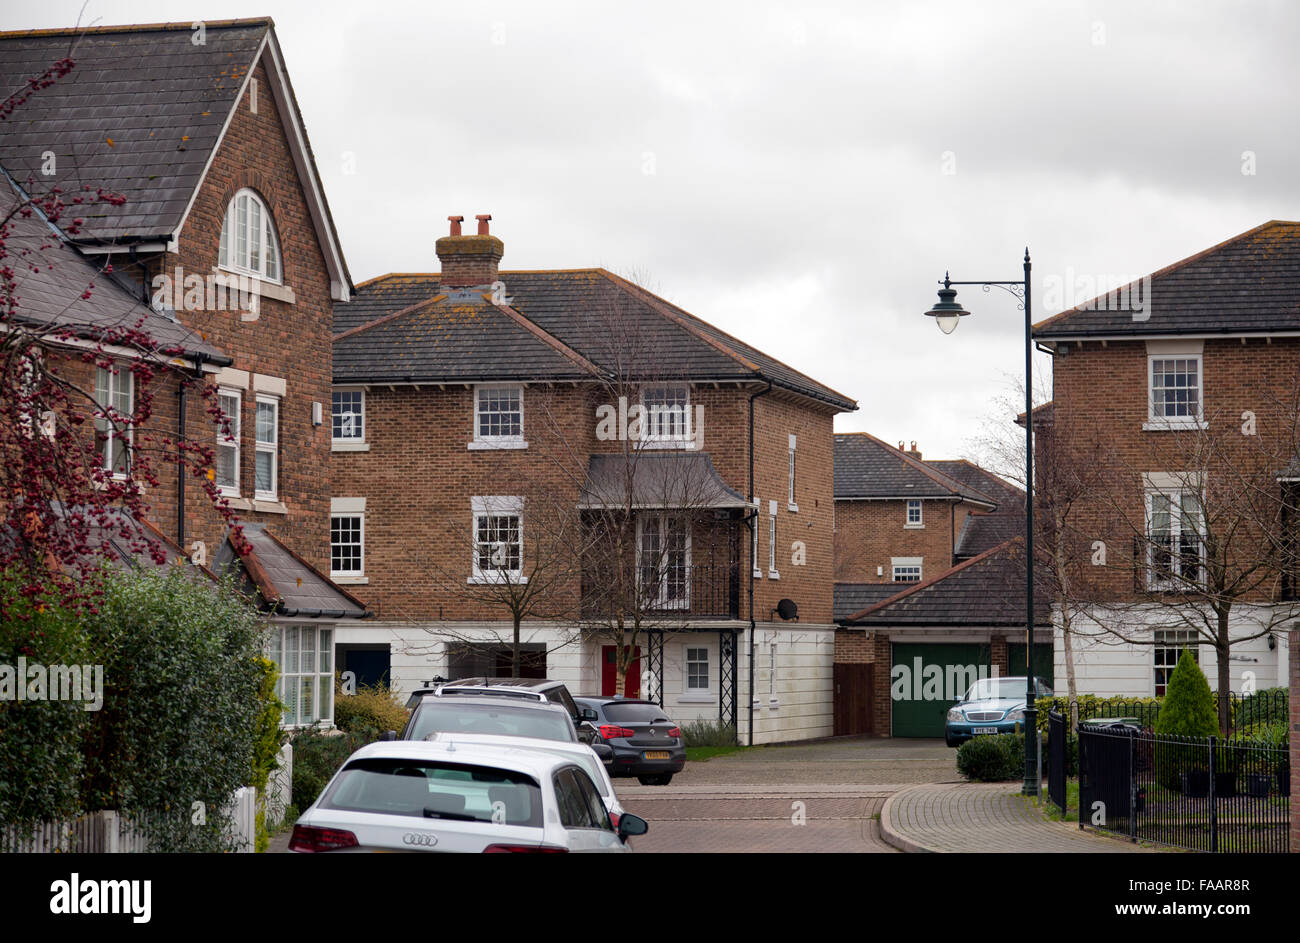 New Village of Kings Hill in West Malling in Kent - UK Stock Photo